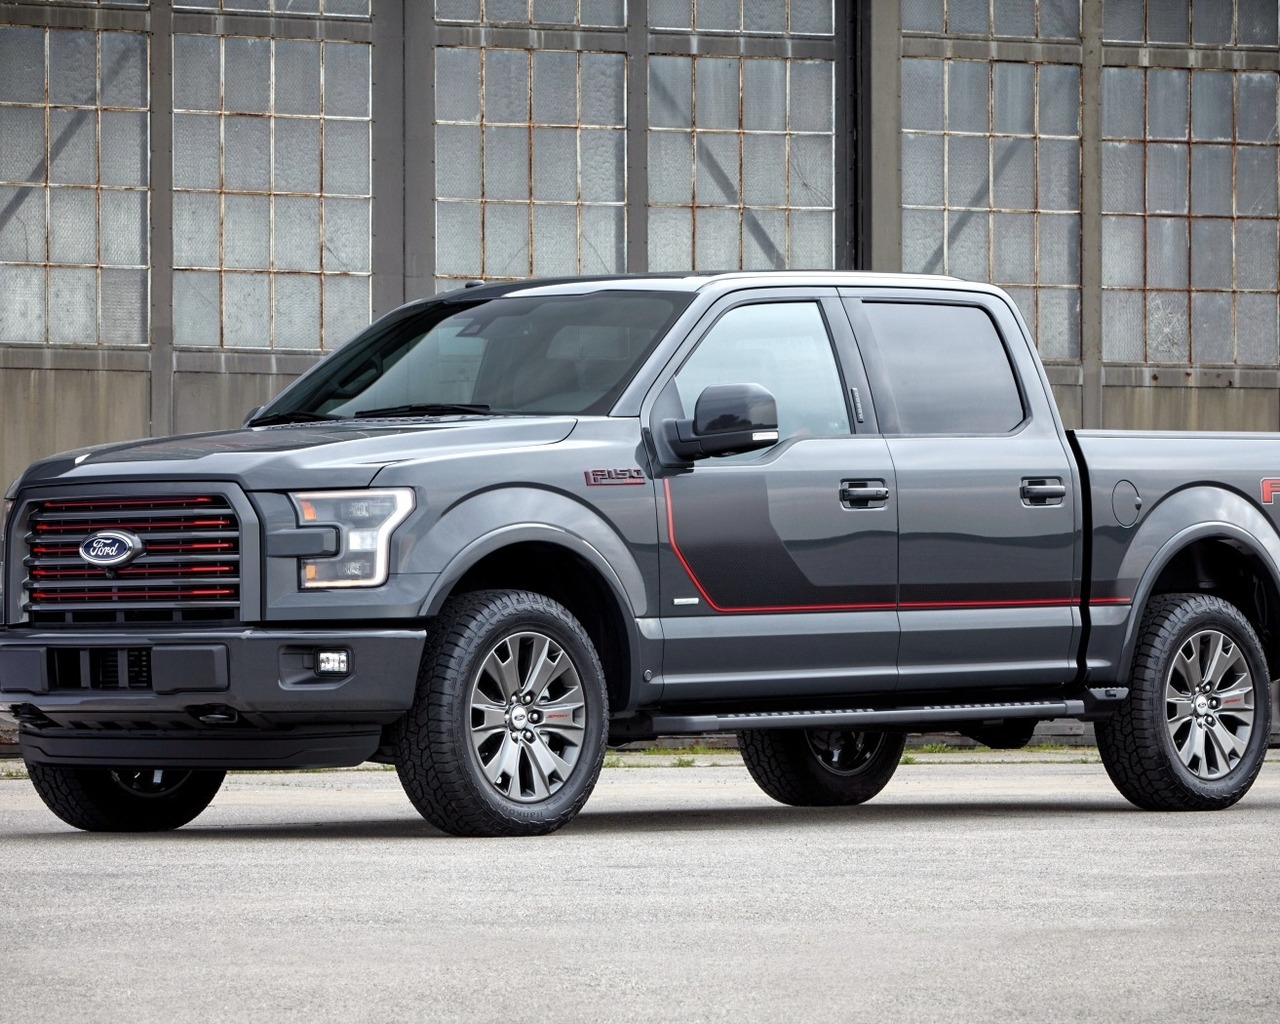 2015 Ford F150 Tremor for 1280 x 1024 resolution